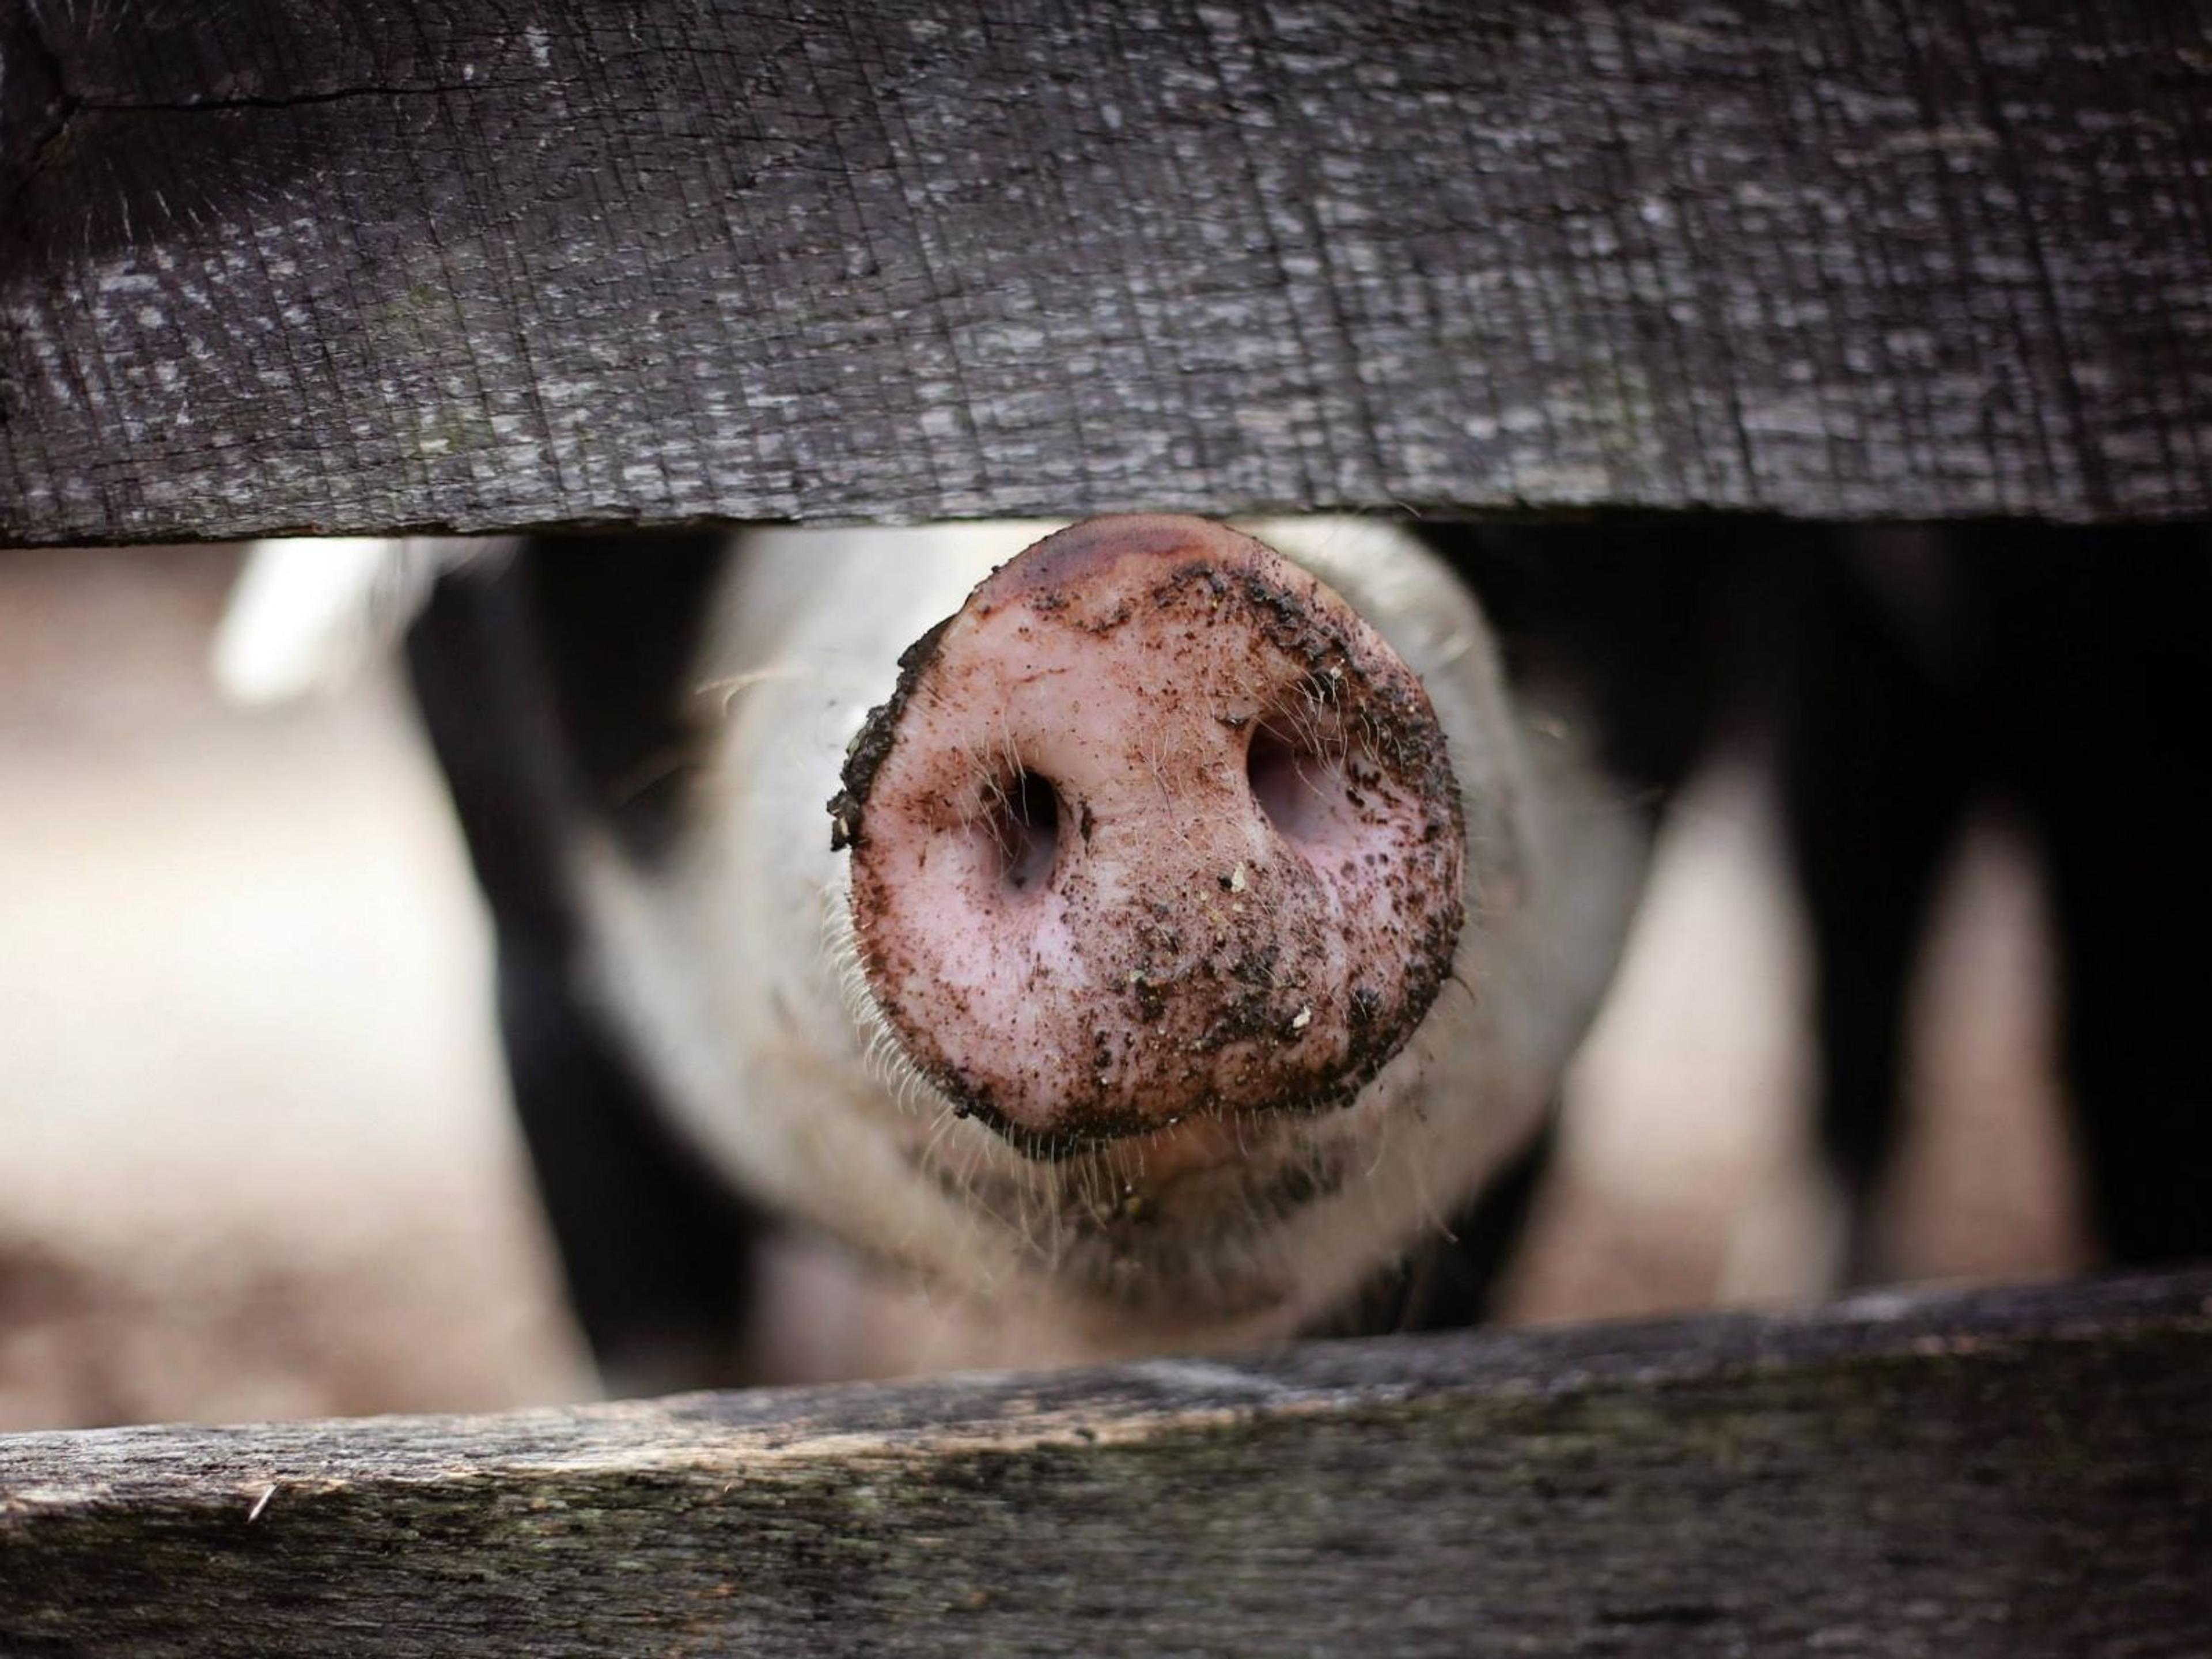 A pig's black and white snout peeking out between two wooden slats.